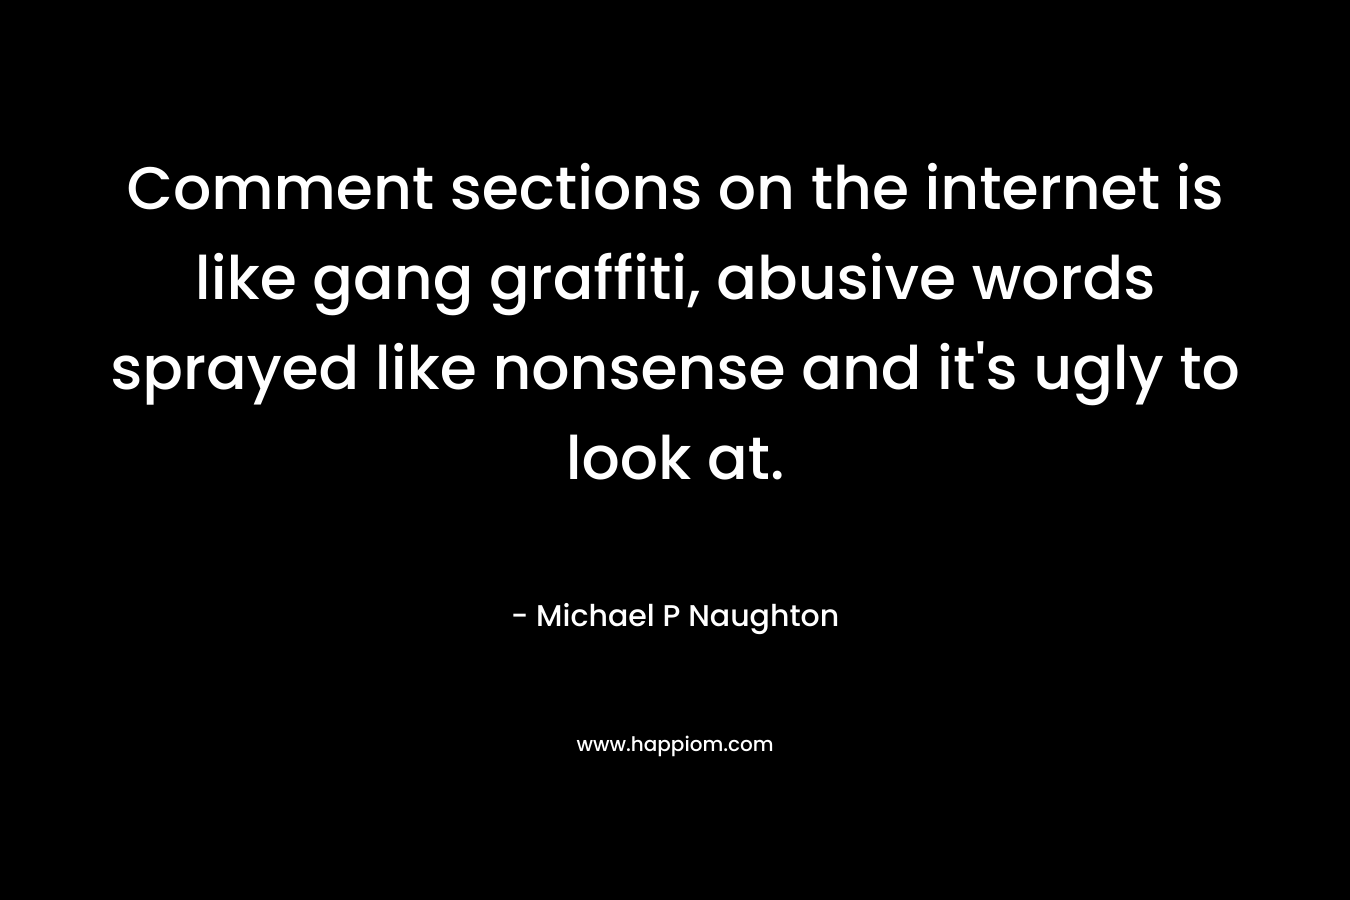 Comment sections on the internet is like gang graffiti, abusive words sprayed like nonsense and it’s ugly to look at. – Michael P Naughton